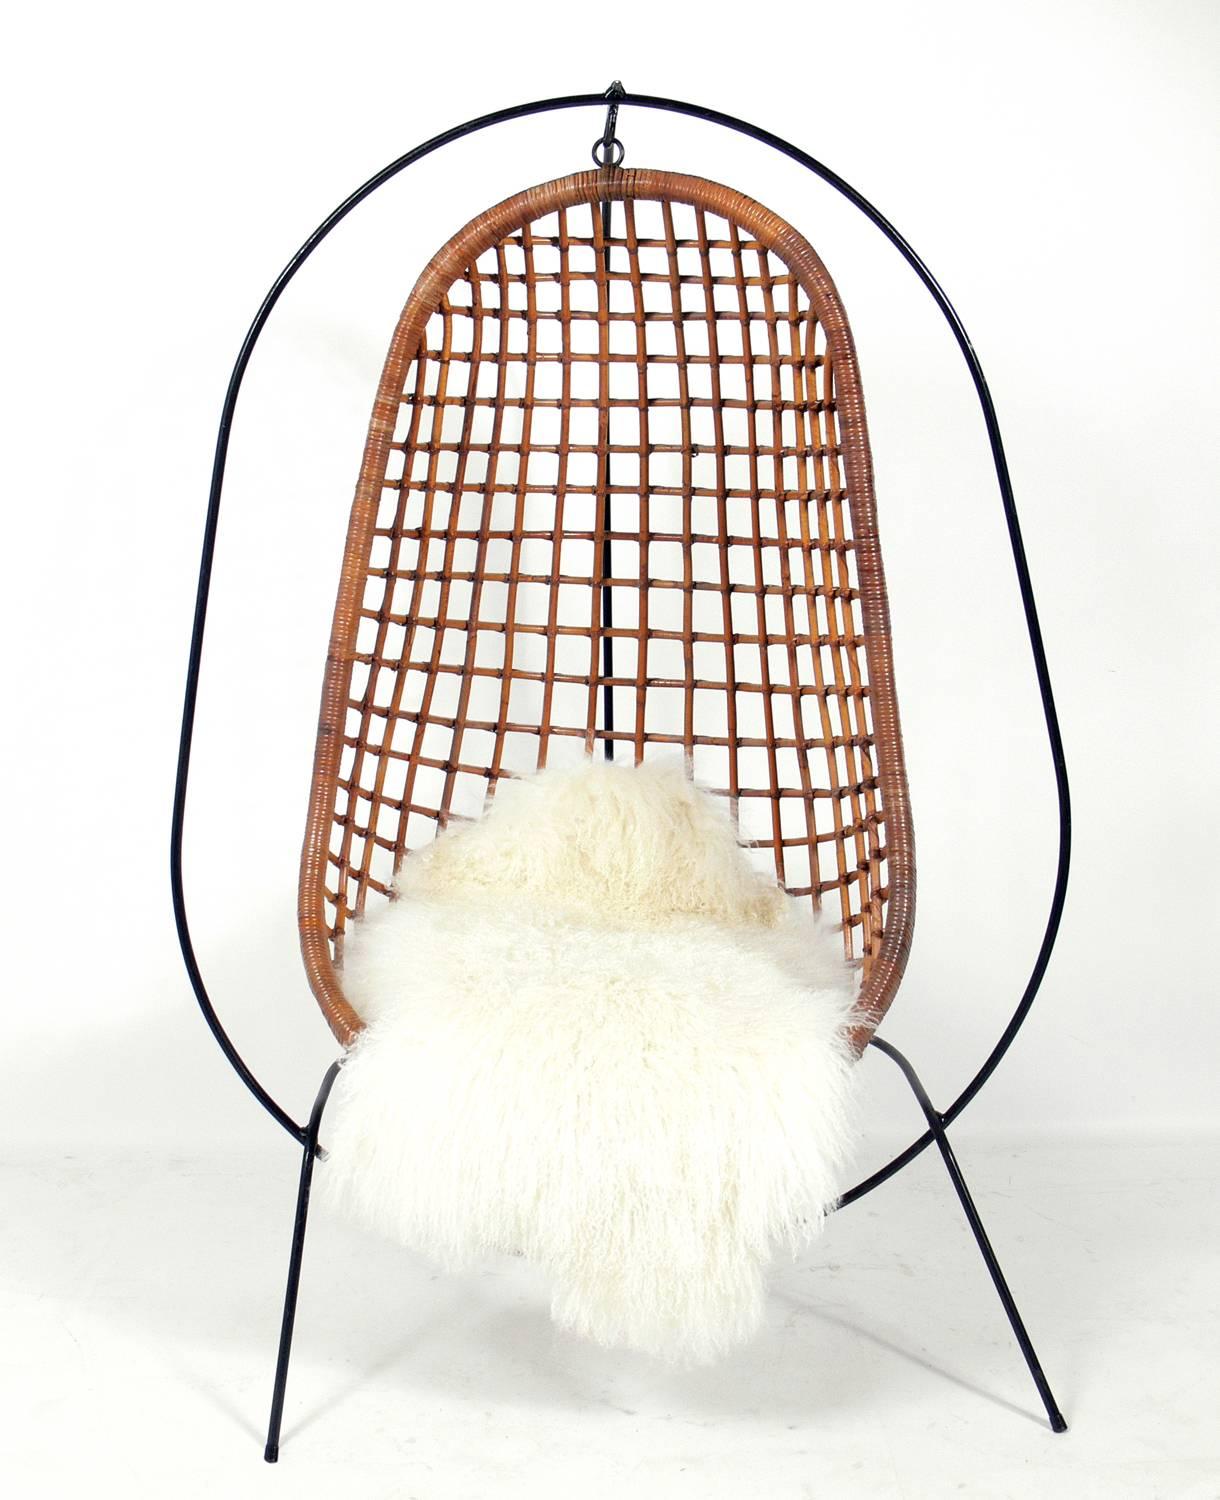 Sculptural iron and rattan hanging chair with Mongolian lamb throw, American, circa 1960s. The iron and rattan combine to give this piece a real California Modern vibe. Newly upholstered cushion and Mongolian lamb throw.